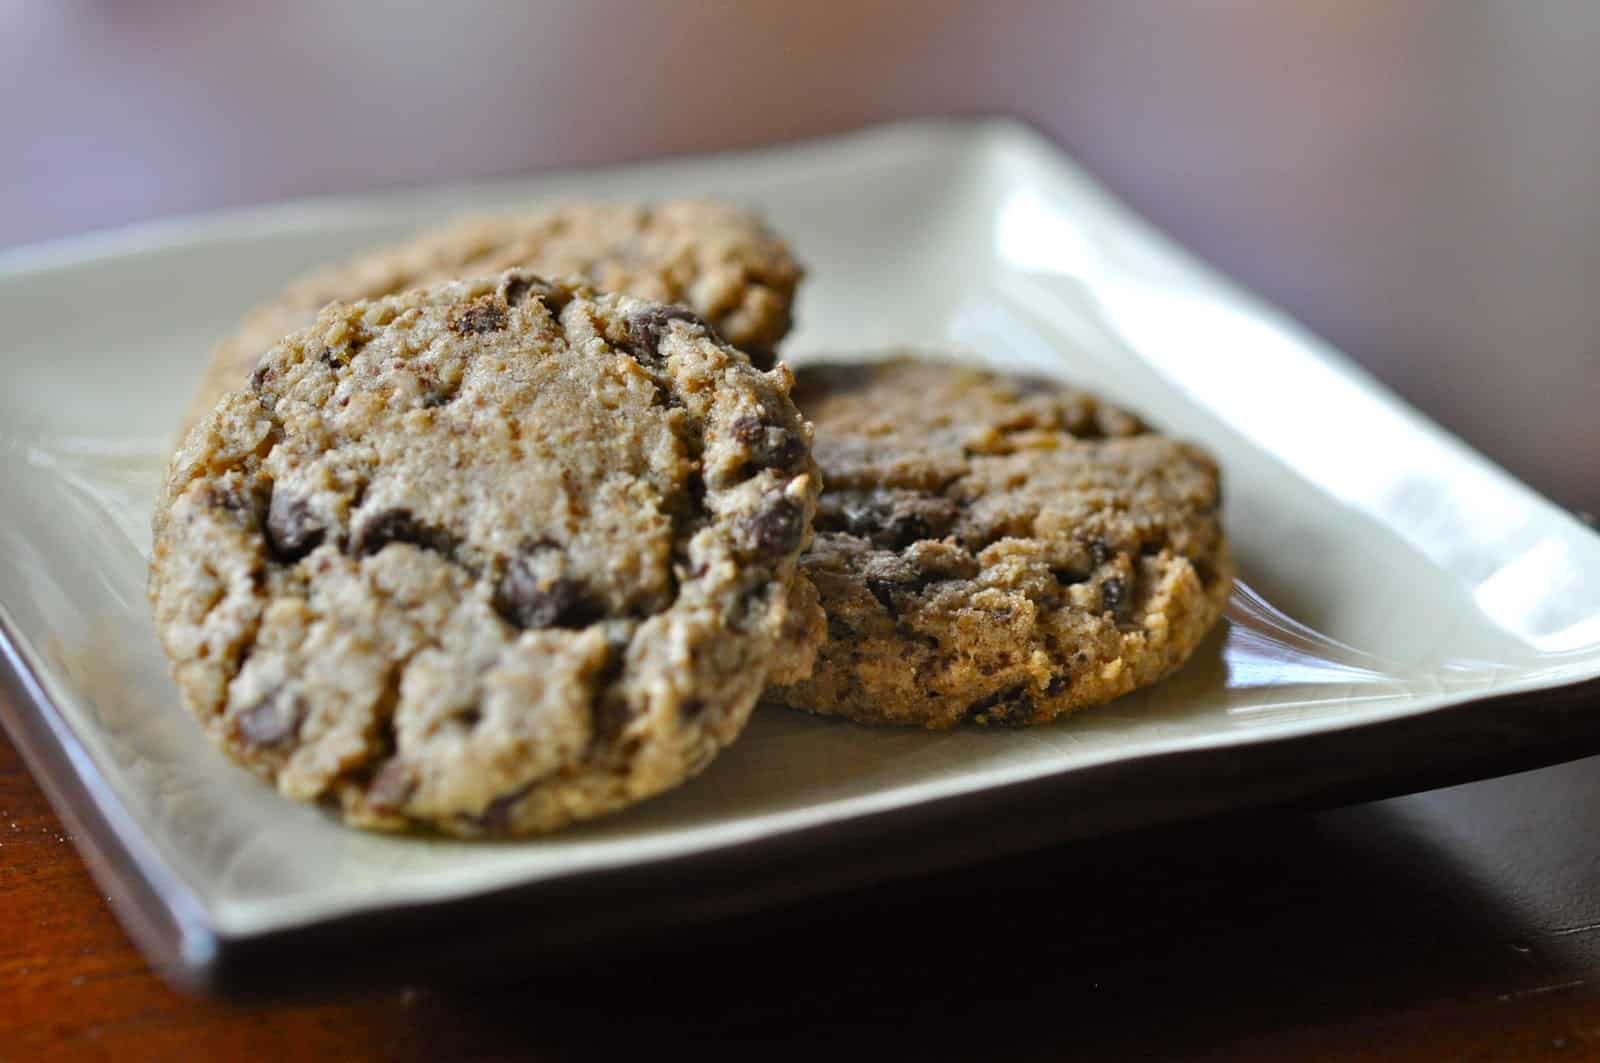 Timeless Oatmeal Chocolate Chip Cookies, a recipe sometimes attributed to Mrs, Field's, are a nostalgic favorite.